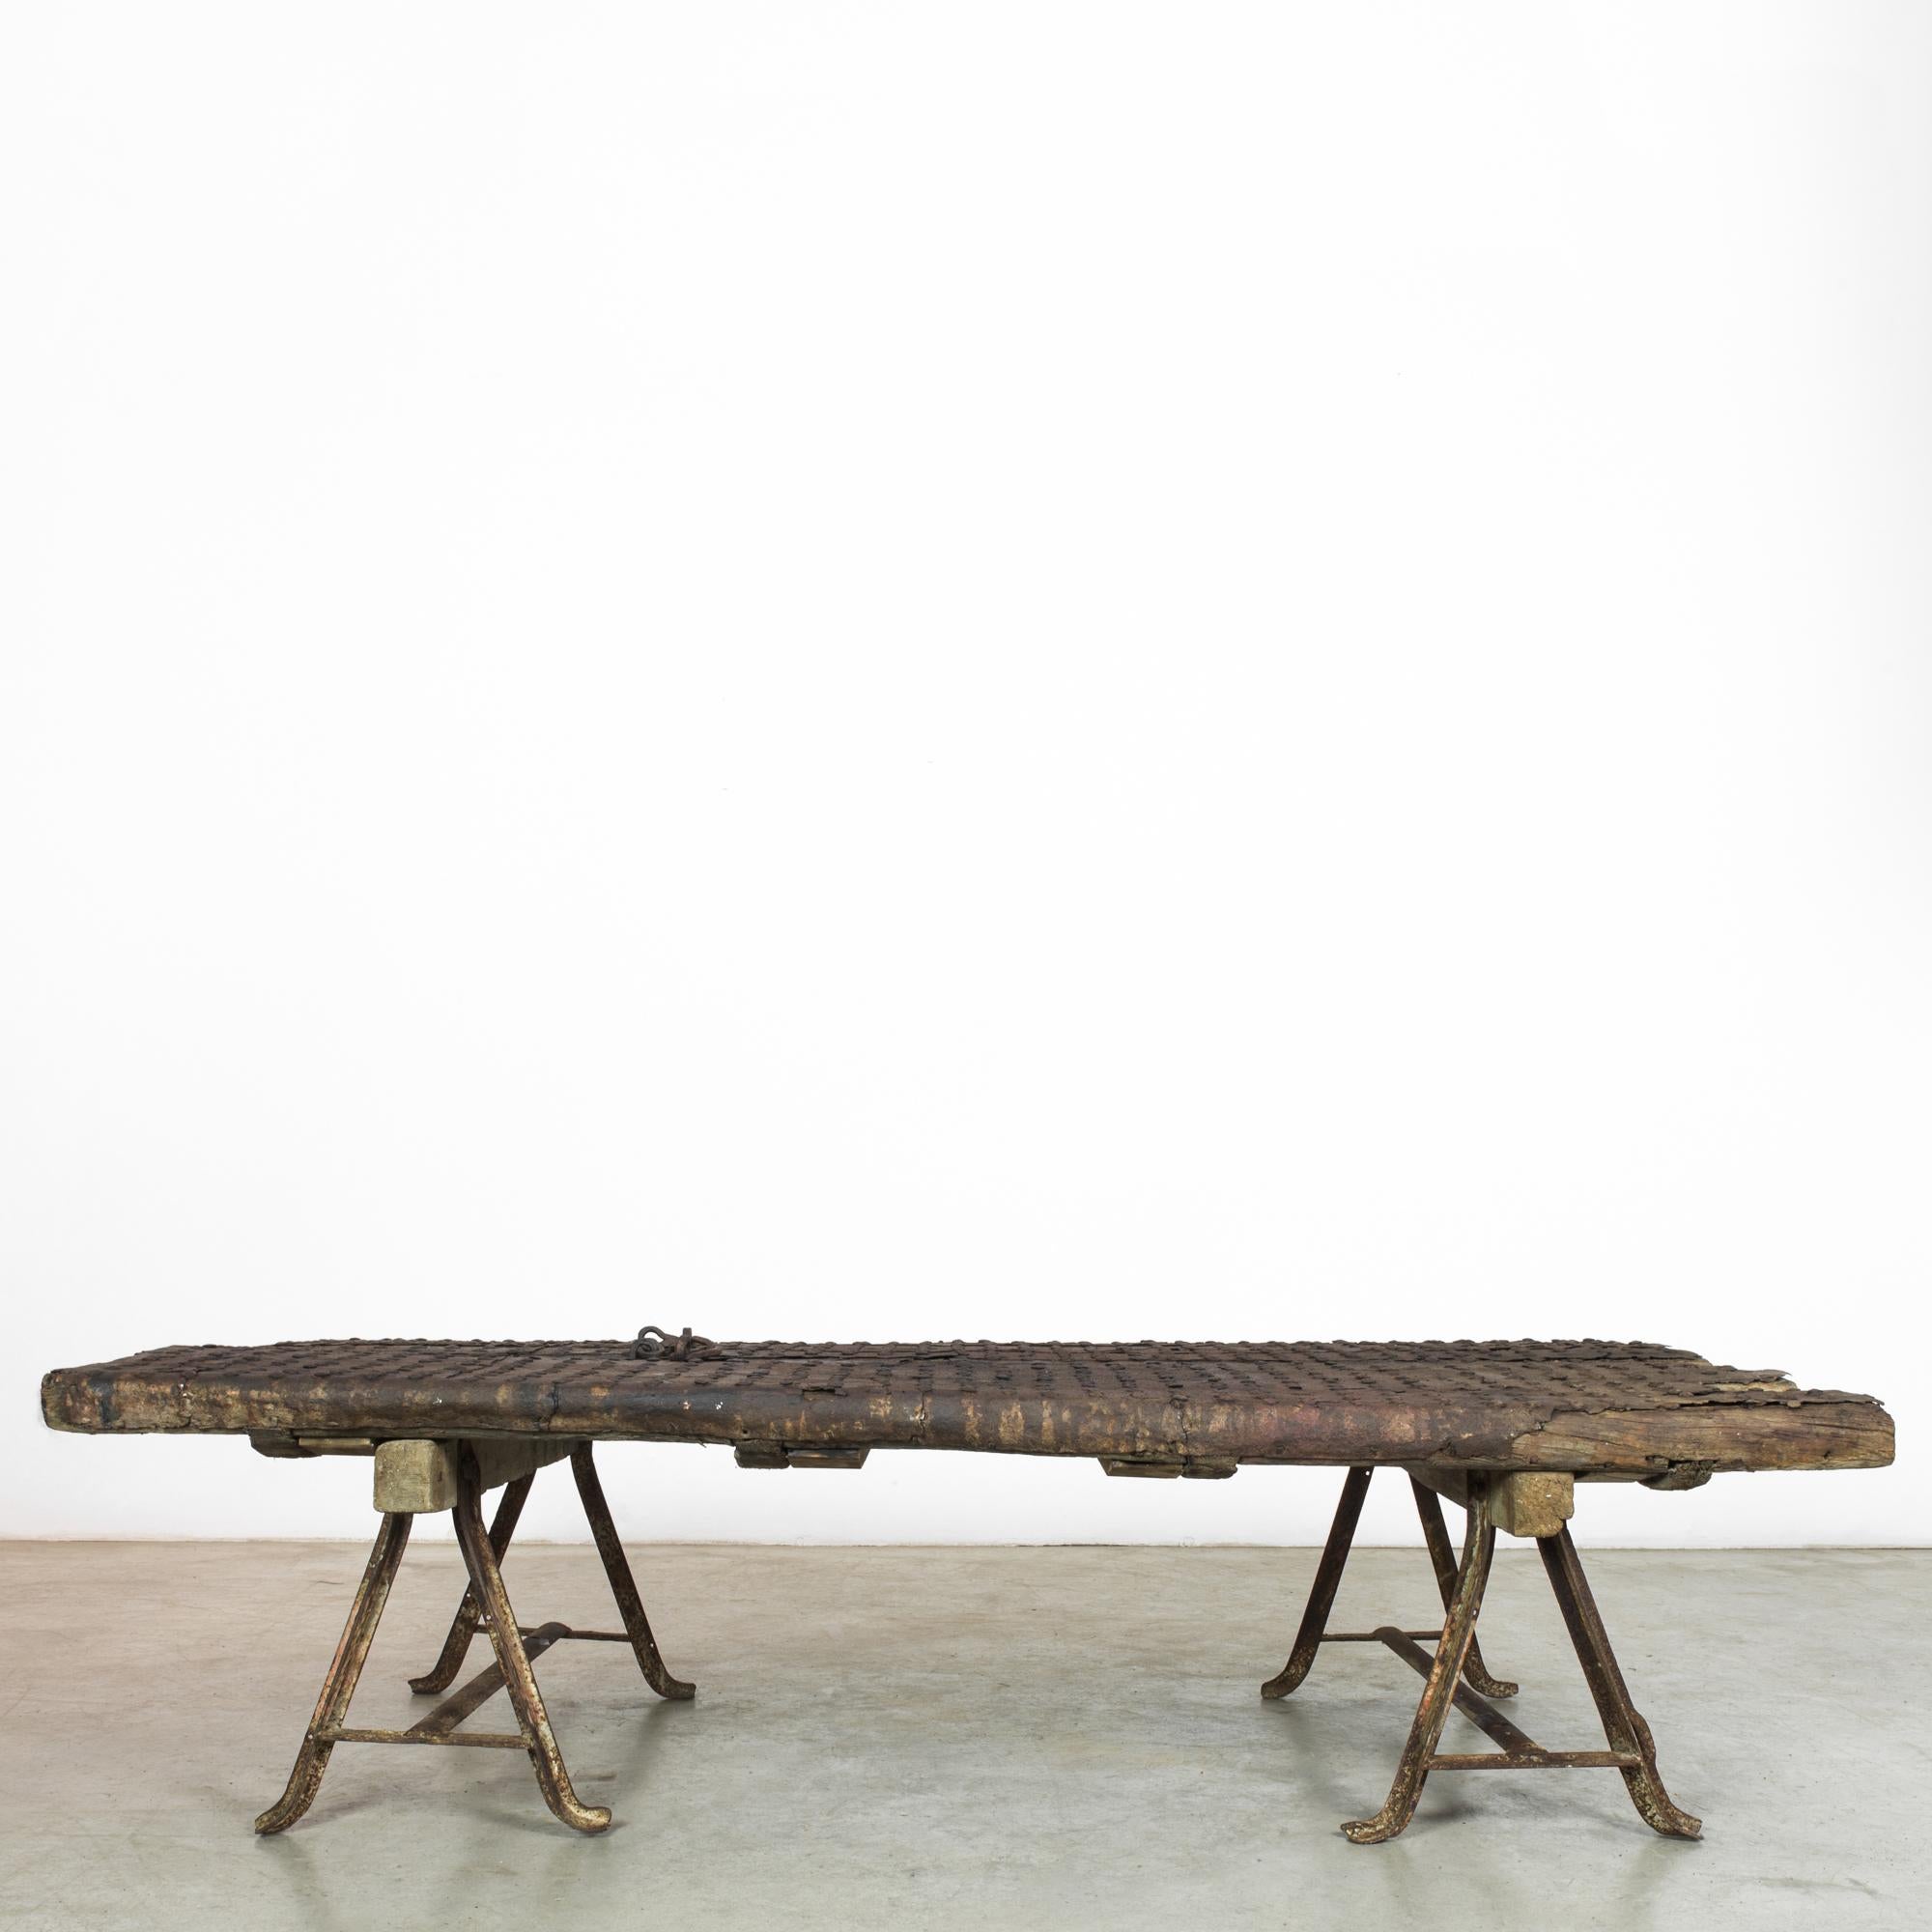 A wooden and metal door from China, circa 1900, rests on two sawhorses. The astounding patina reveals the traces of time. Metal spheres dot the entire surface, giving the doors a textured, handcrafted quality. Welded steel A-frames grip hefty wooden